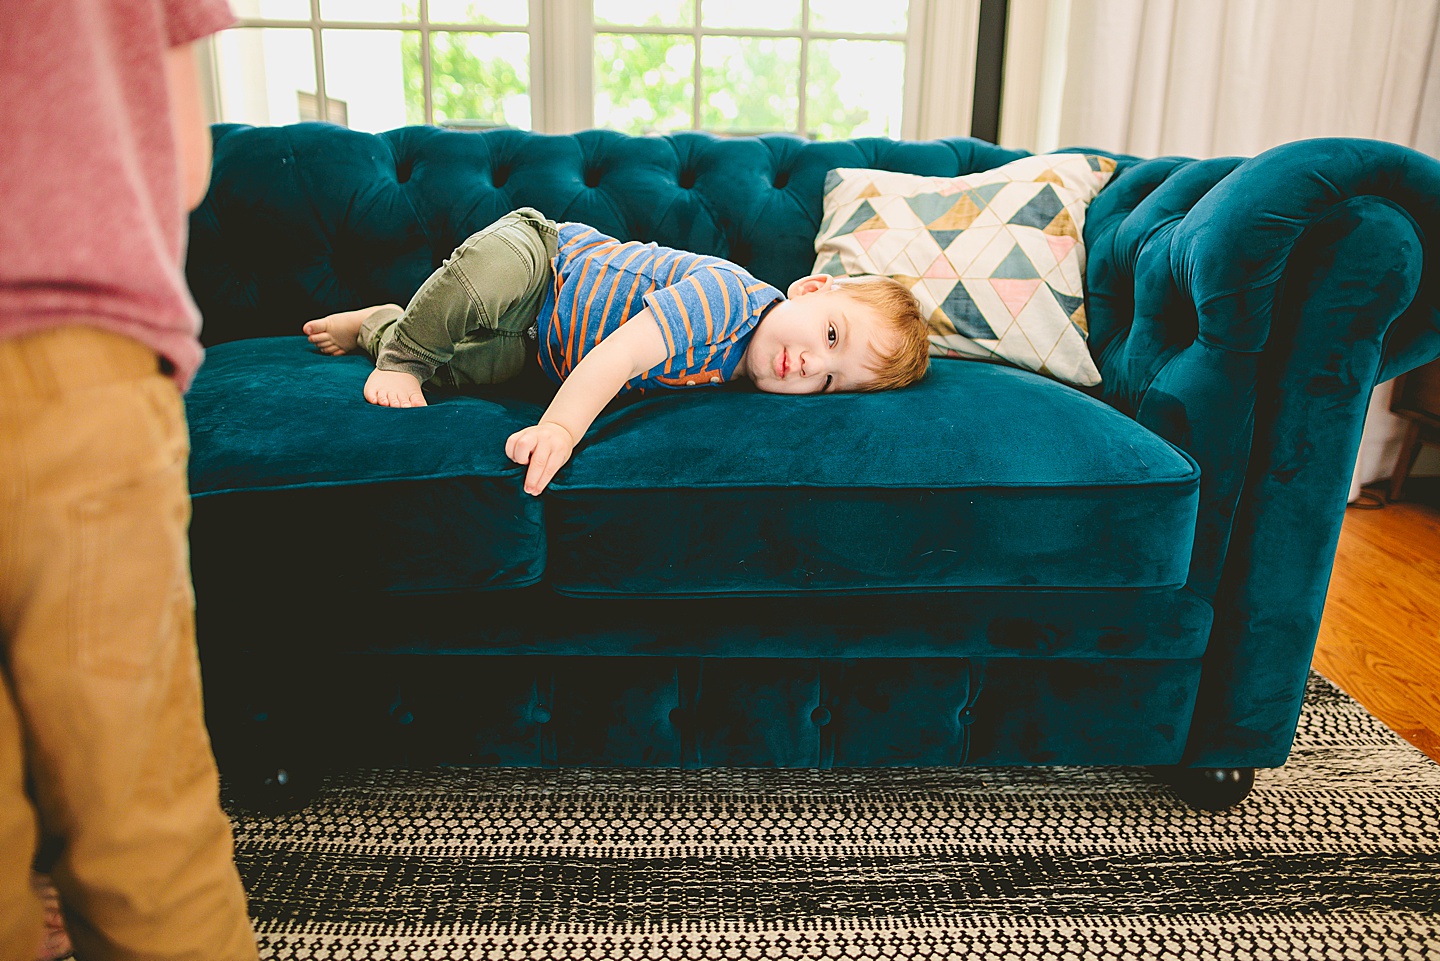 Toddler laying on couch